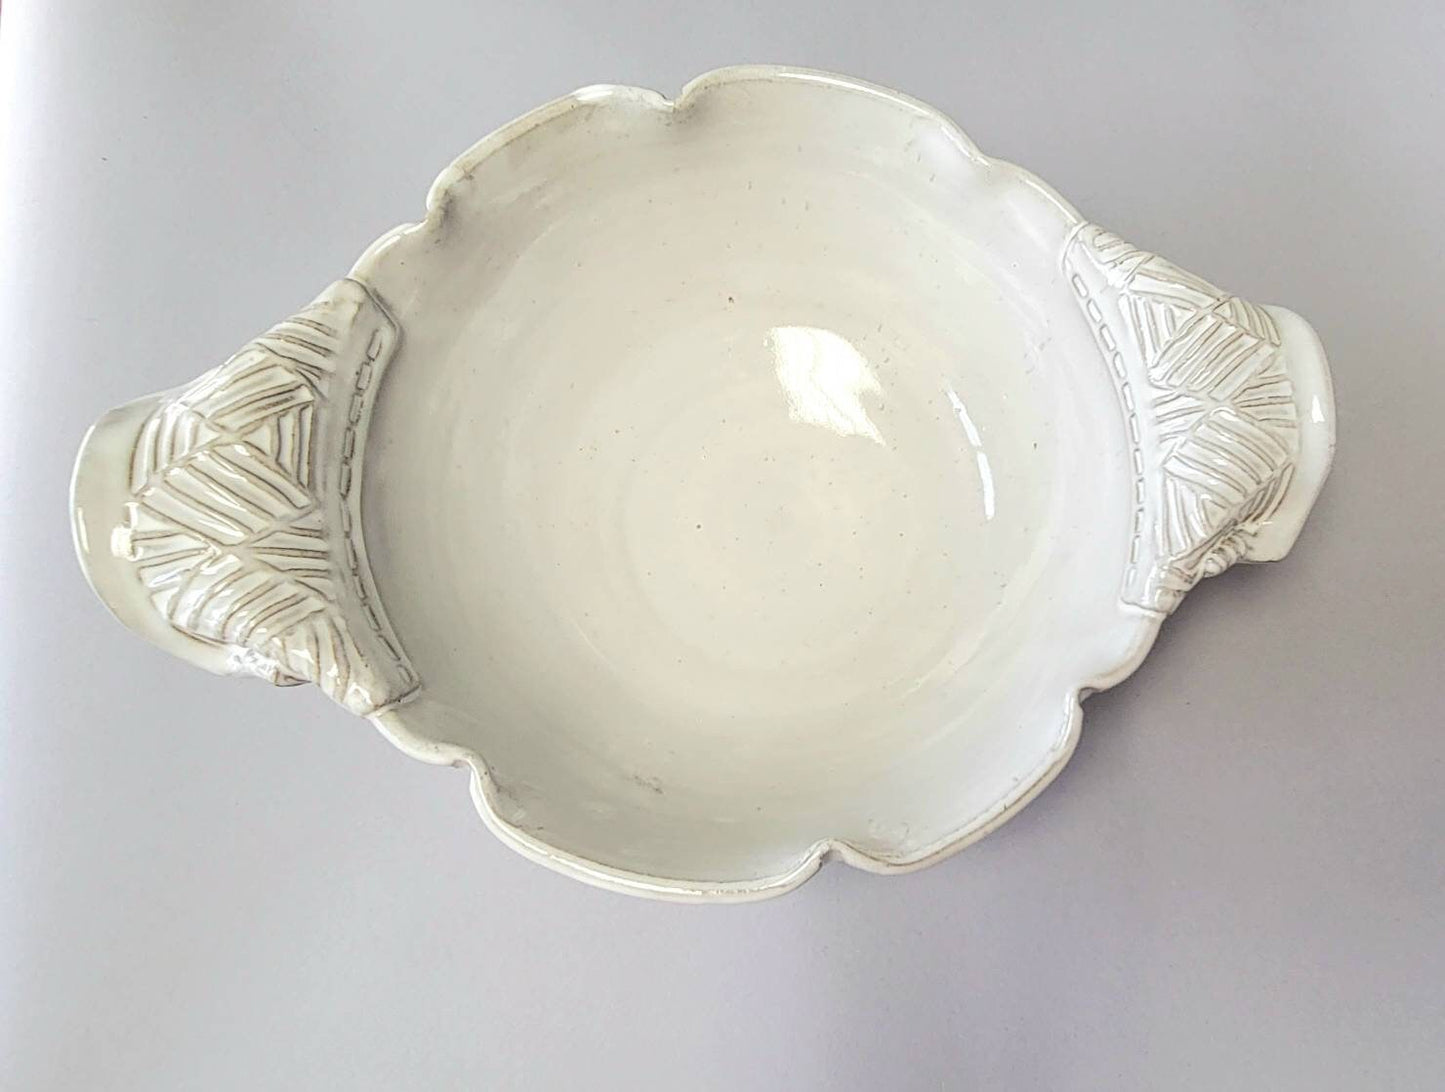 Large Scalloped Serving Bowl with Geometric Textured Handles White